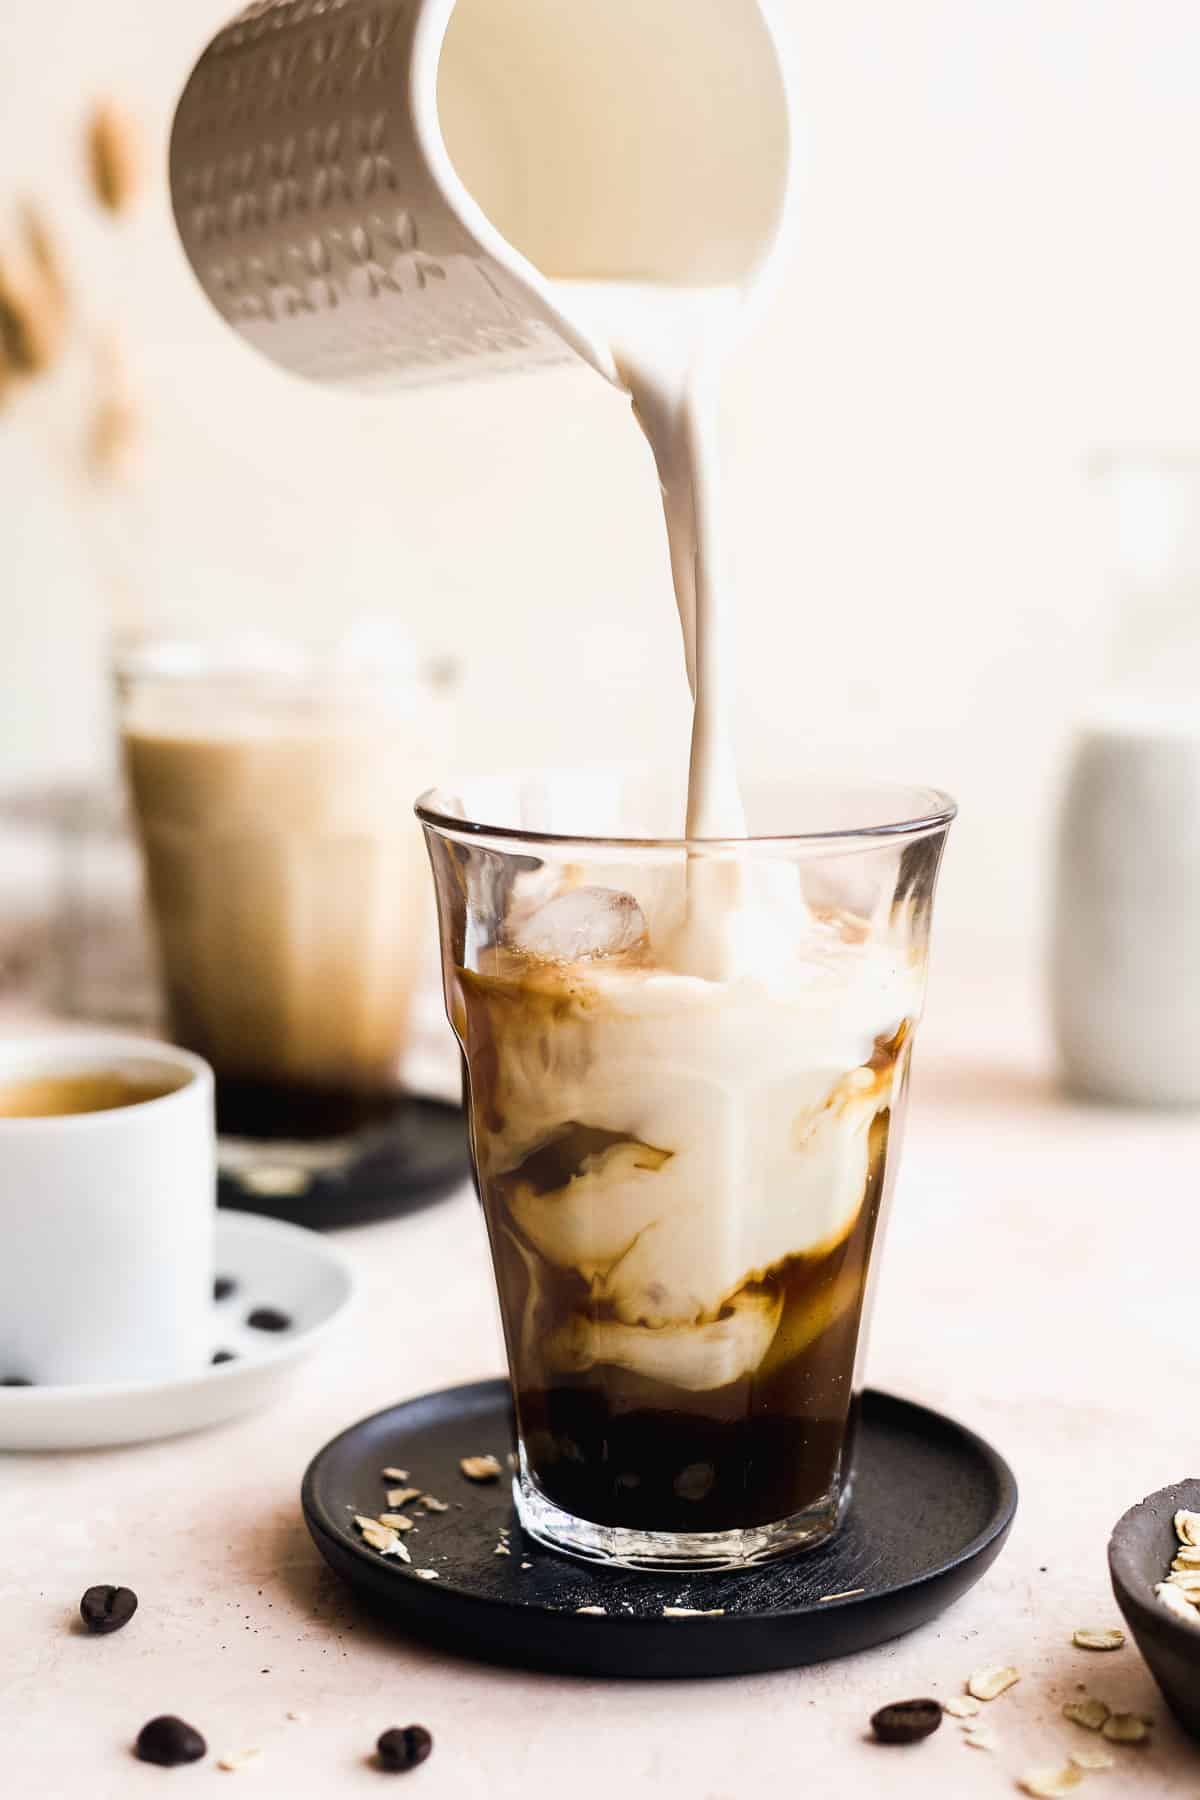 Milk bring poured into glass with iced coffee on a black coaster.